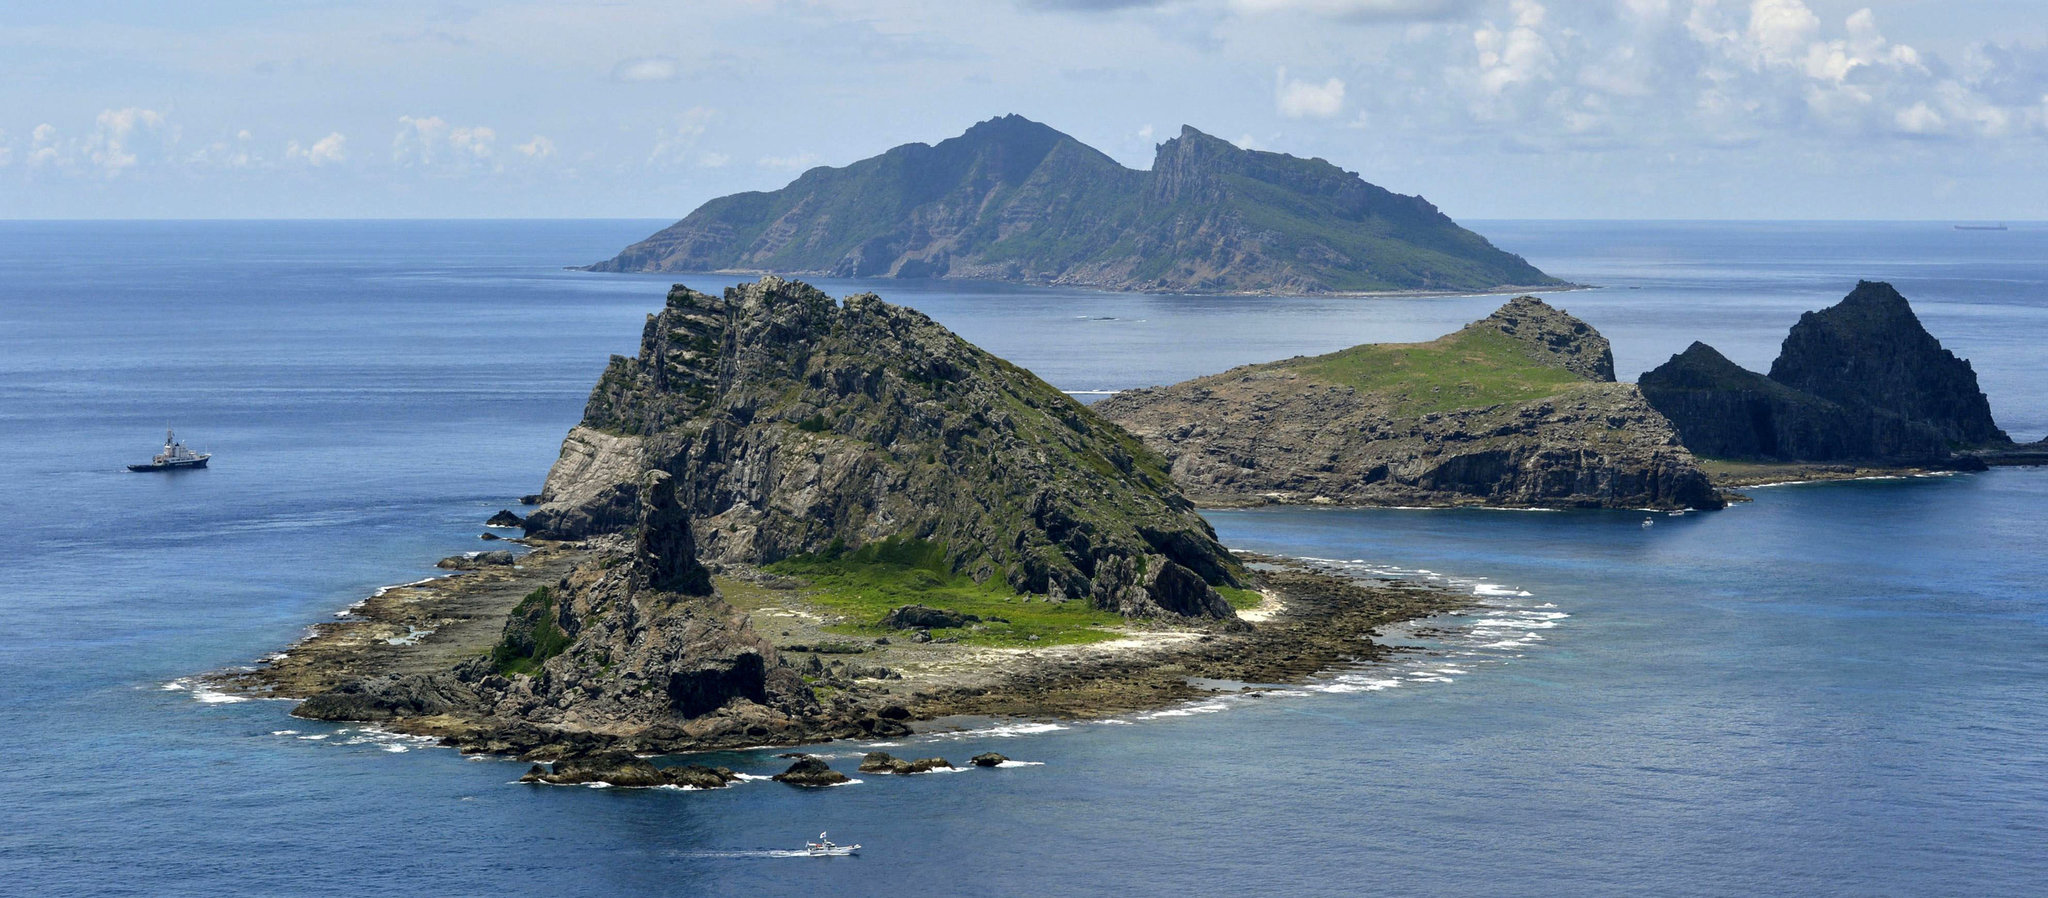 Chinese and Japanese Leaders Publicly Admit Each Other's Claims to East China Sea